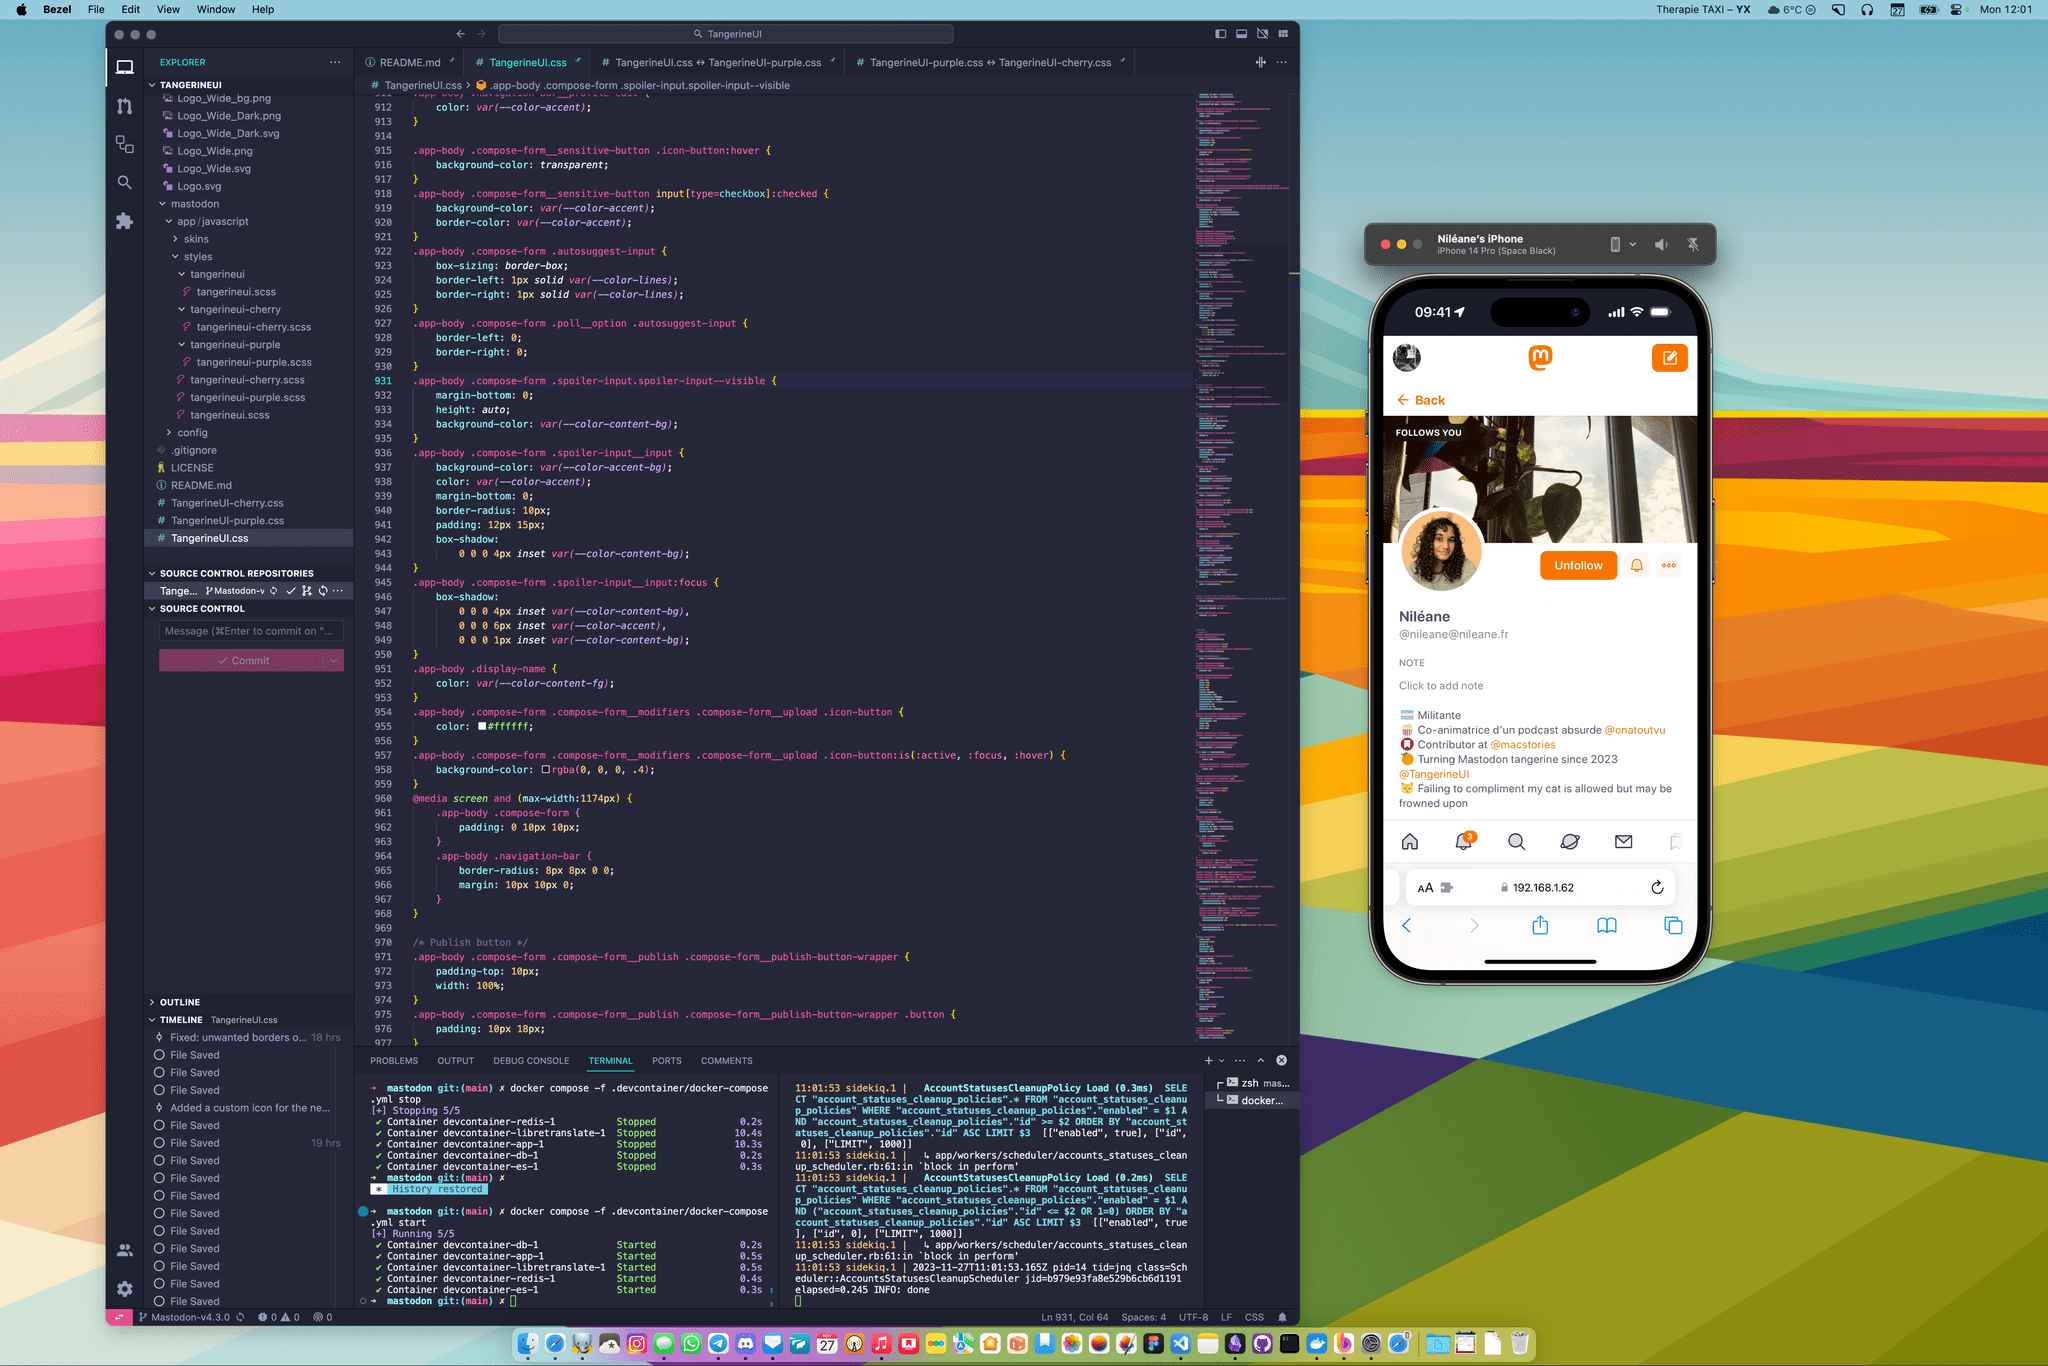 Working on my custom theme for Mastodon and testing my changes on the iPhone in real time using Bezel.